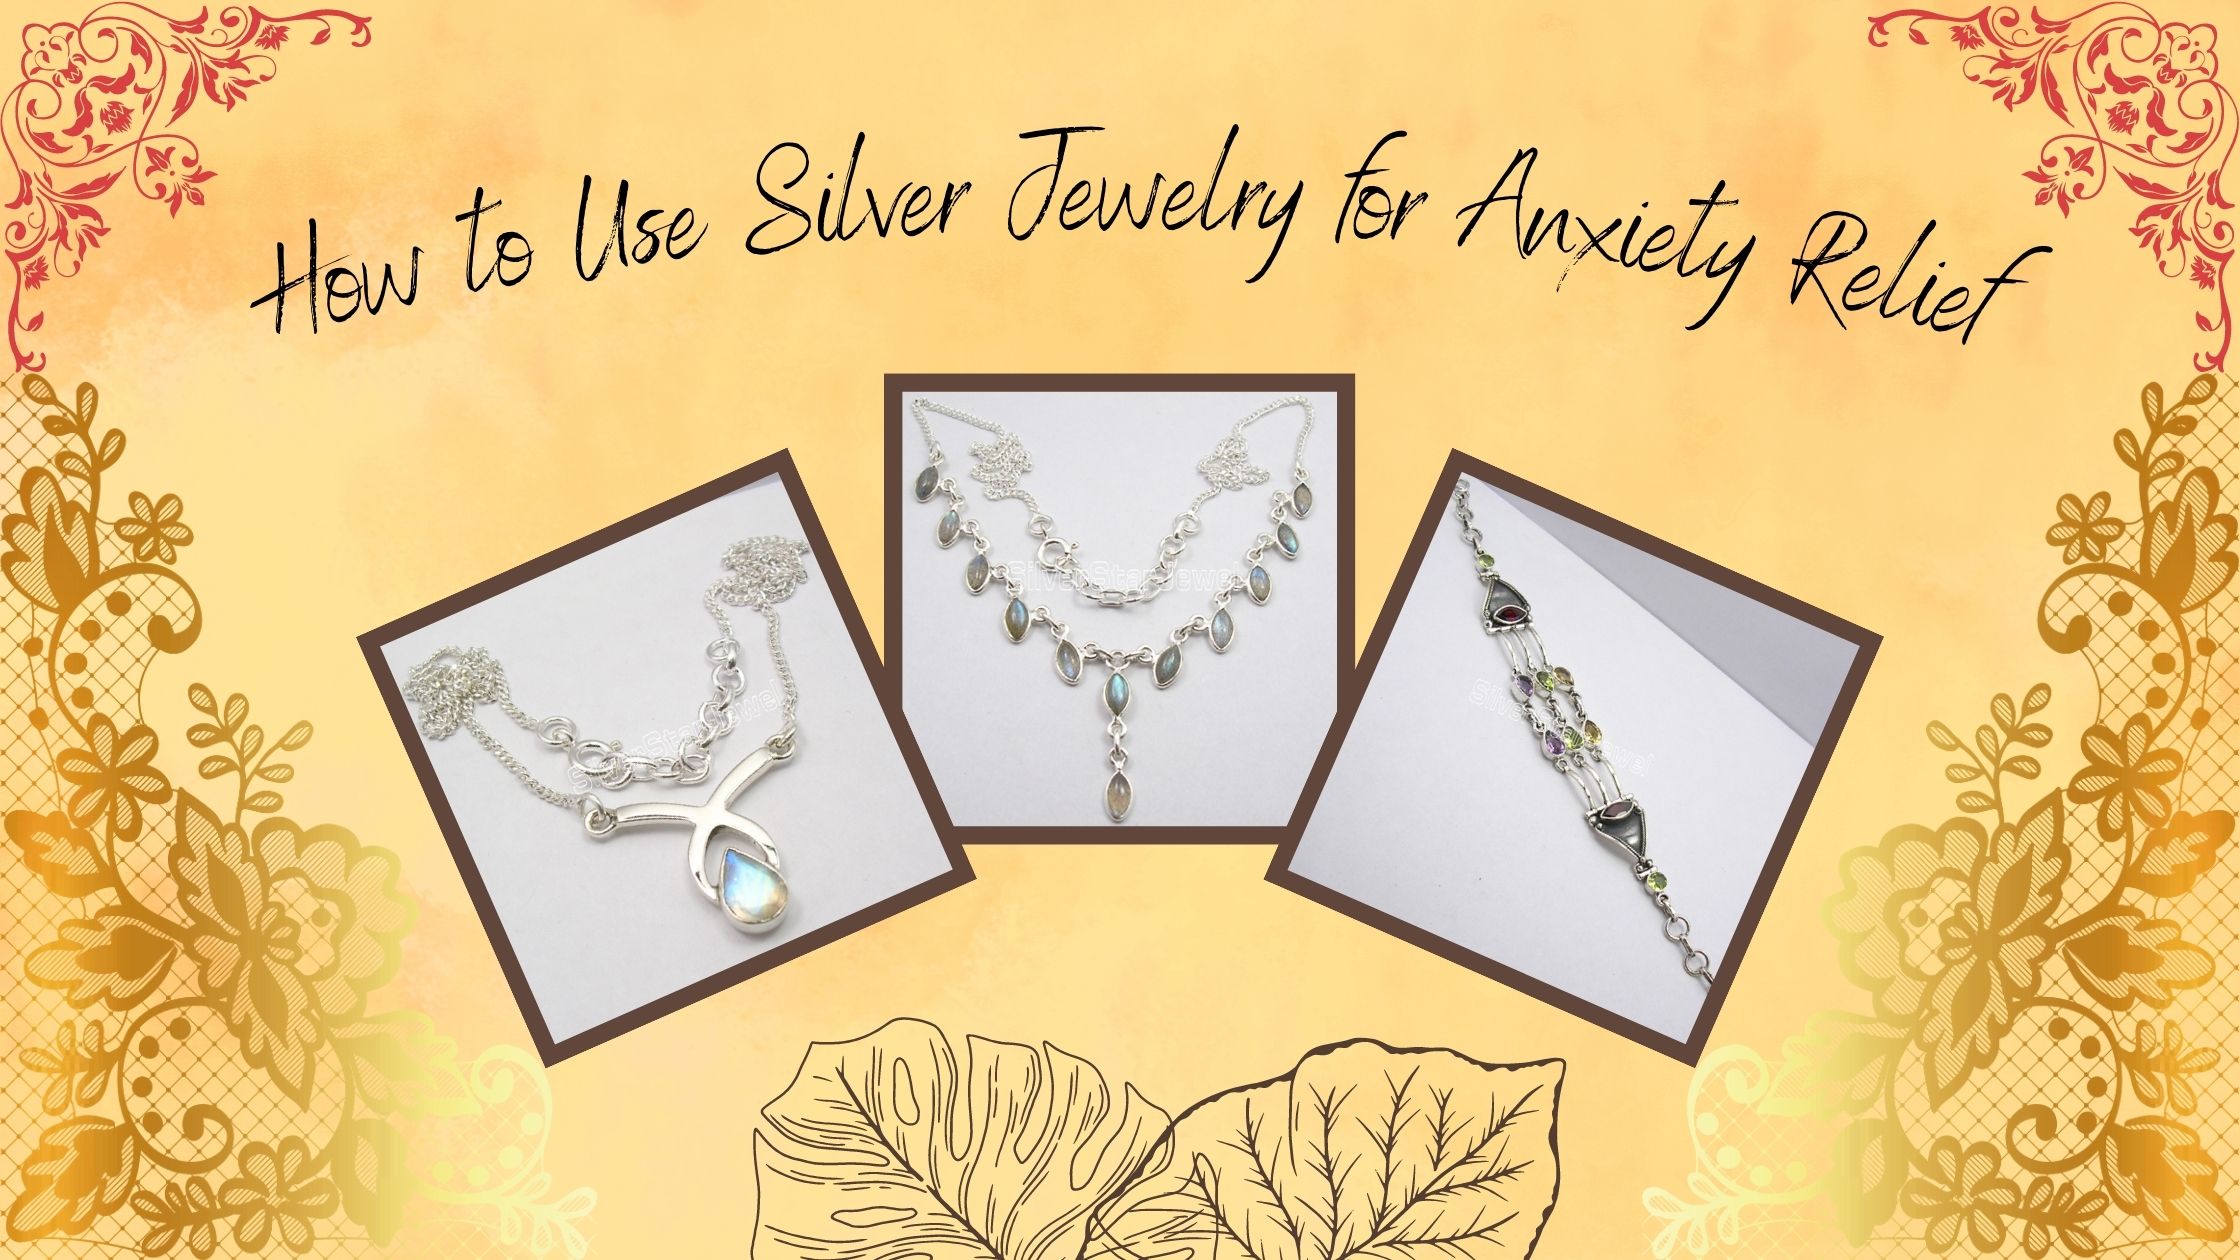 How to Use Silver Jewelry for Anxiety Relief